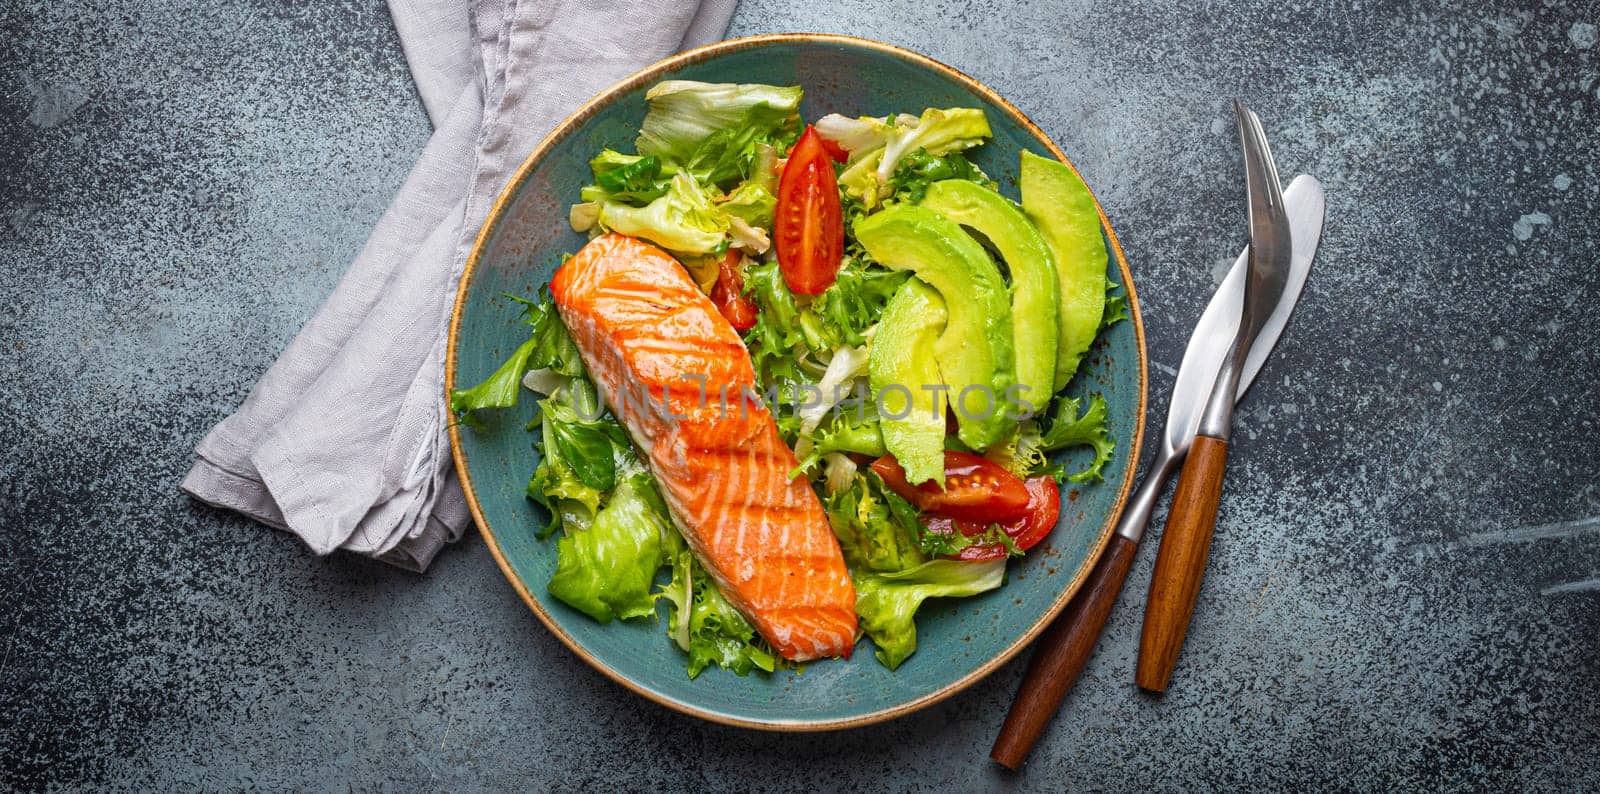 Grilled fish salmon steak and vegetables salad with avocado on ceramic plate on rustic stone background top view, balanced diet or healthy nutrition salad meal with salmon and veggies